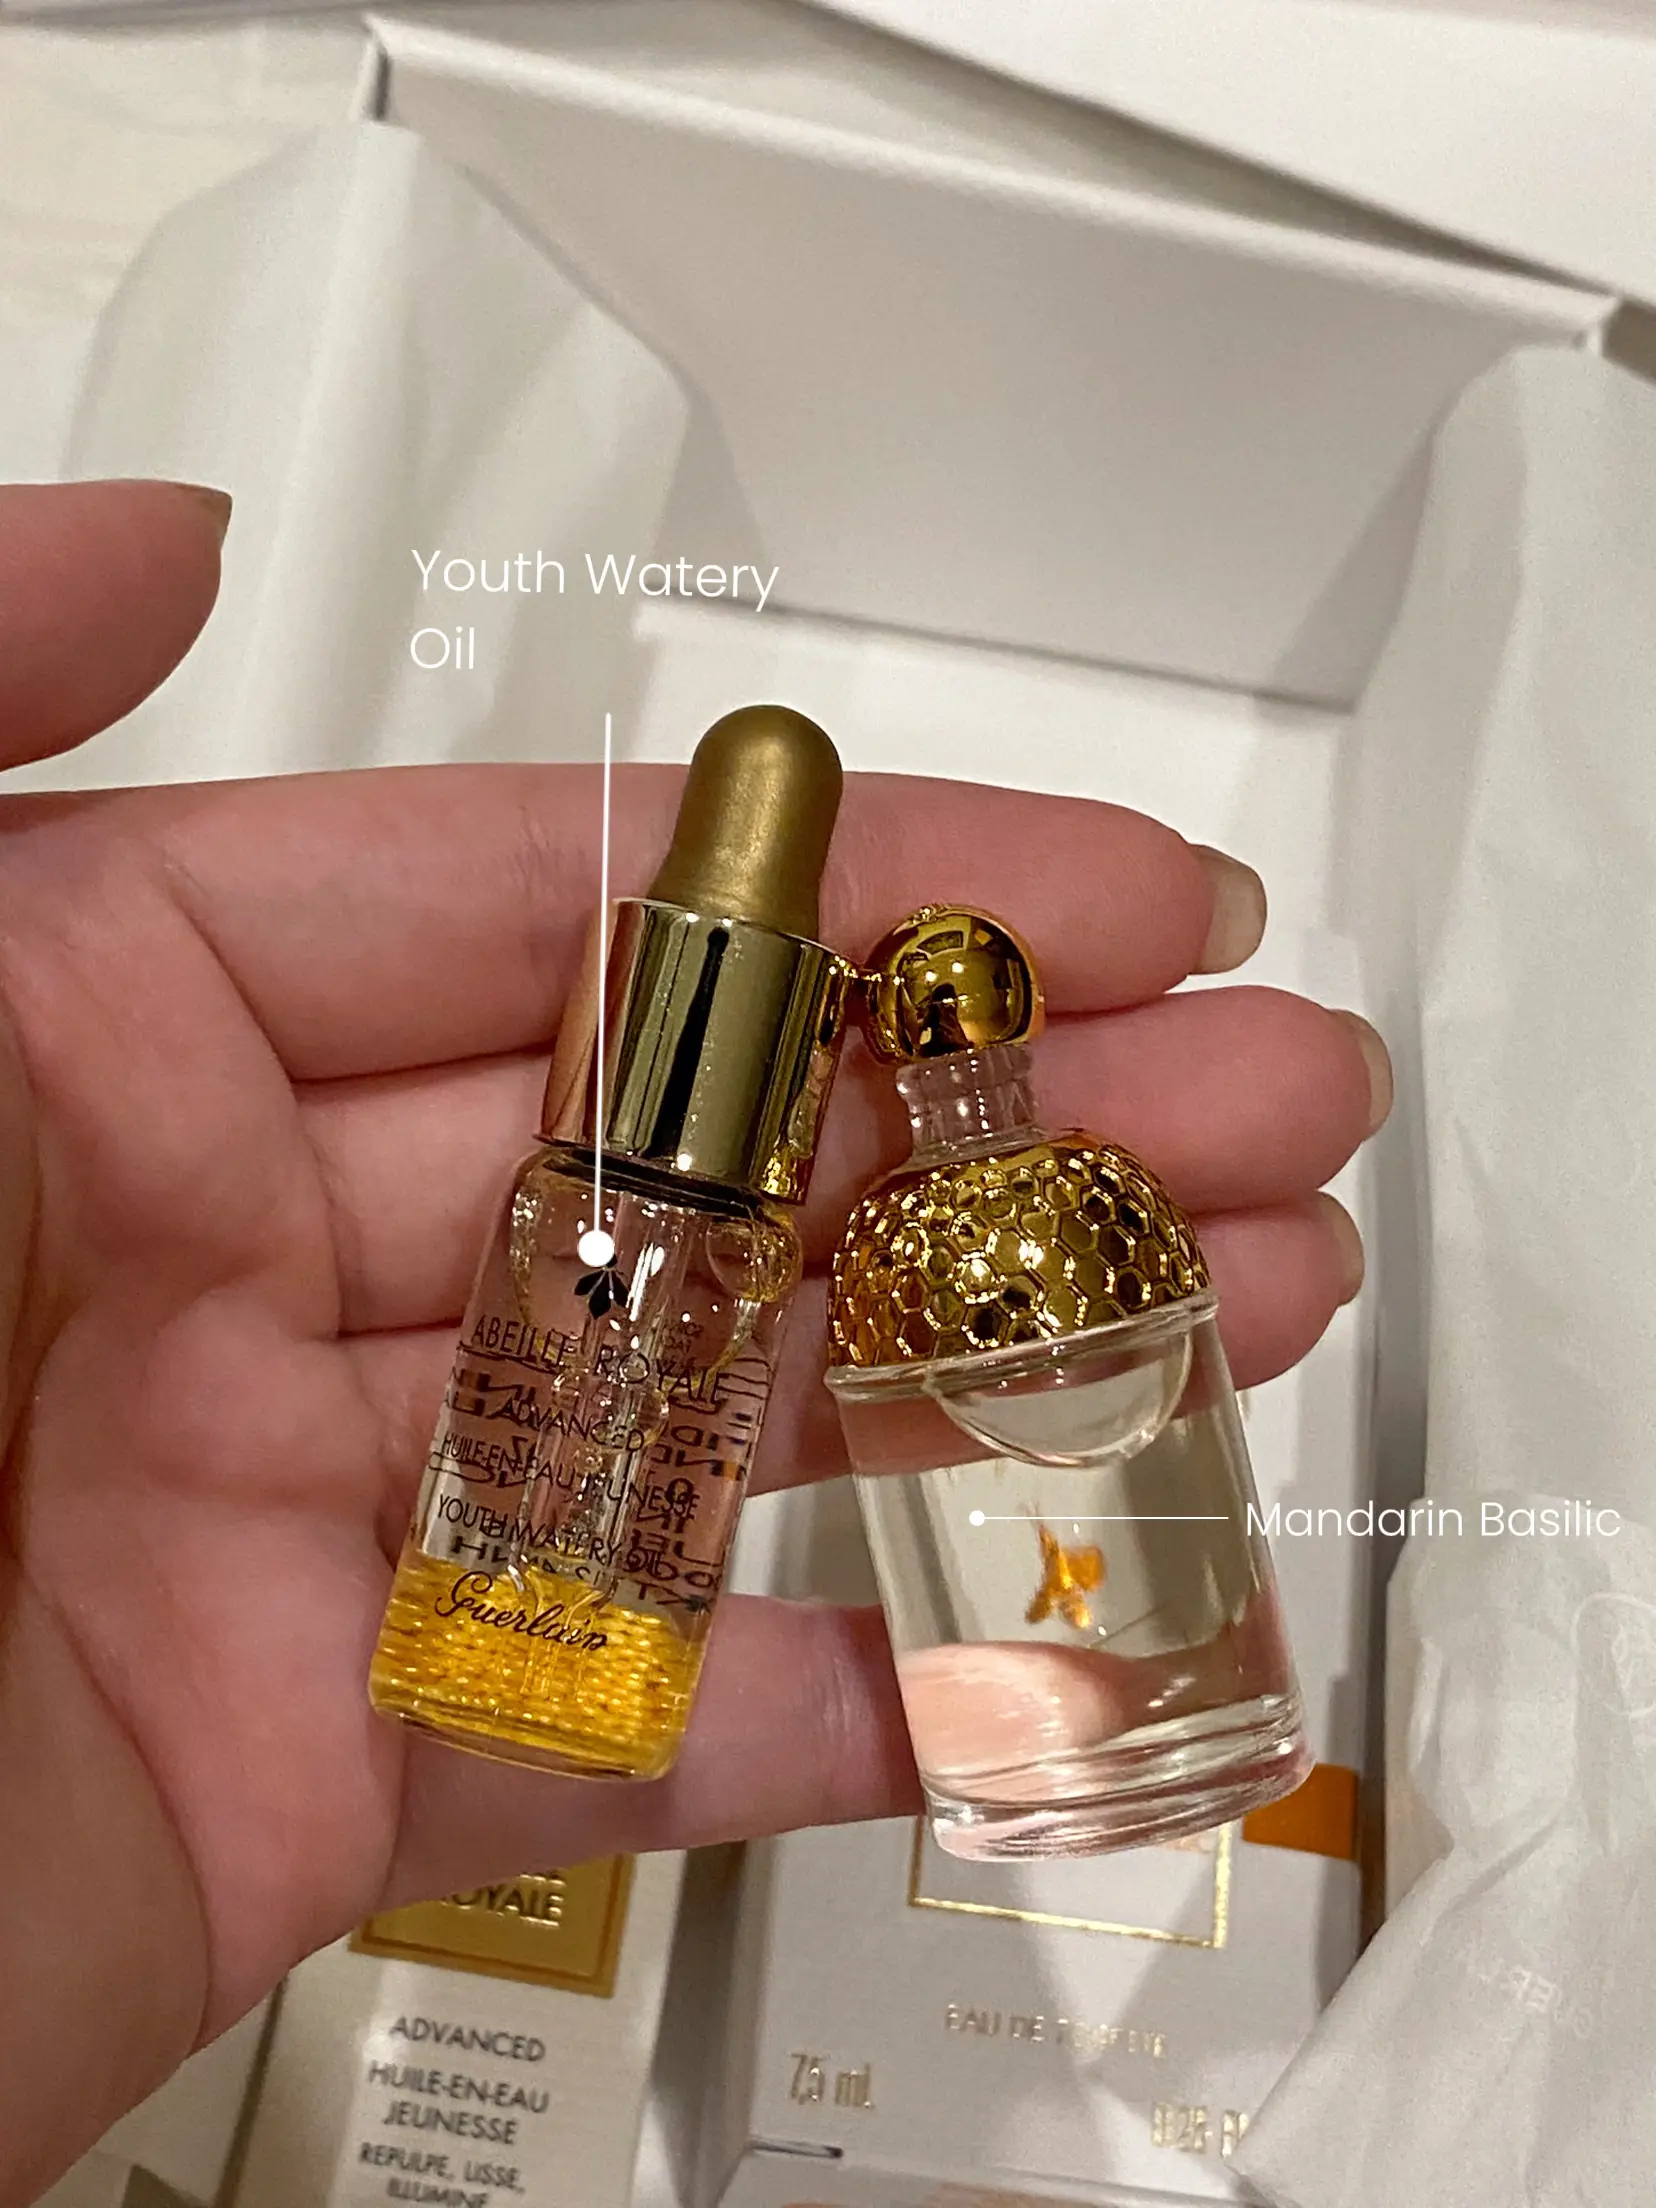 Guerlain Limited Edition Abeille Royale Oil and Routine Discovery